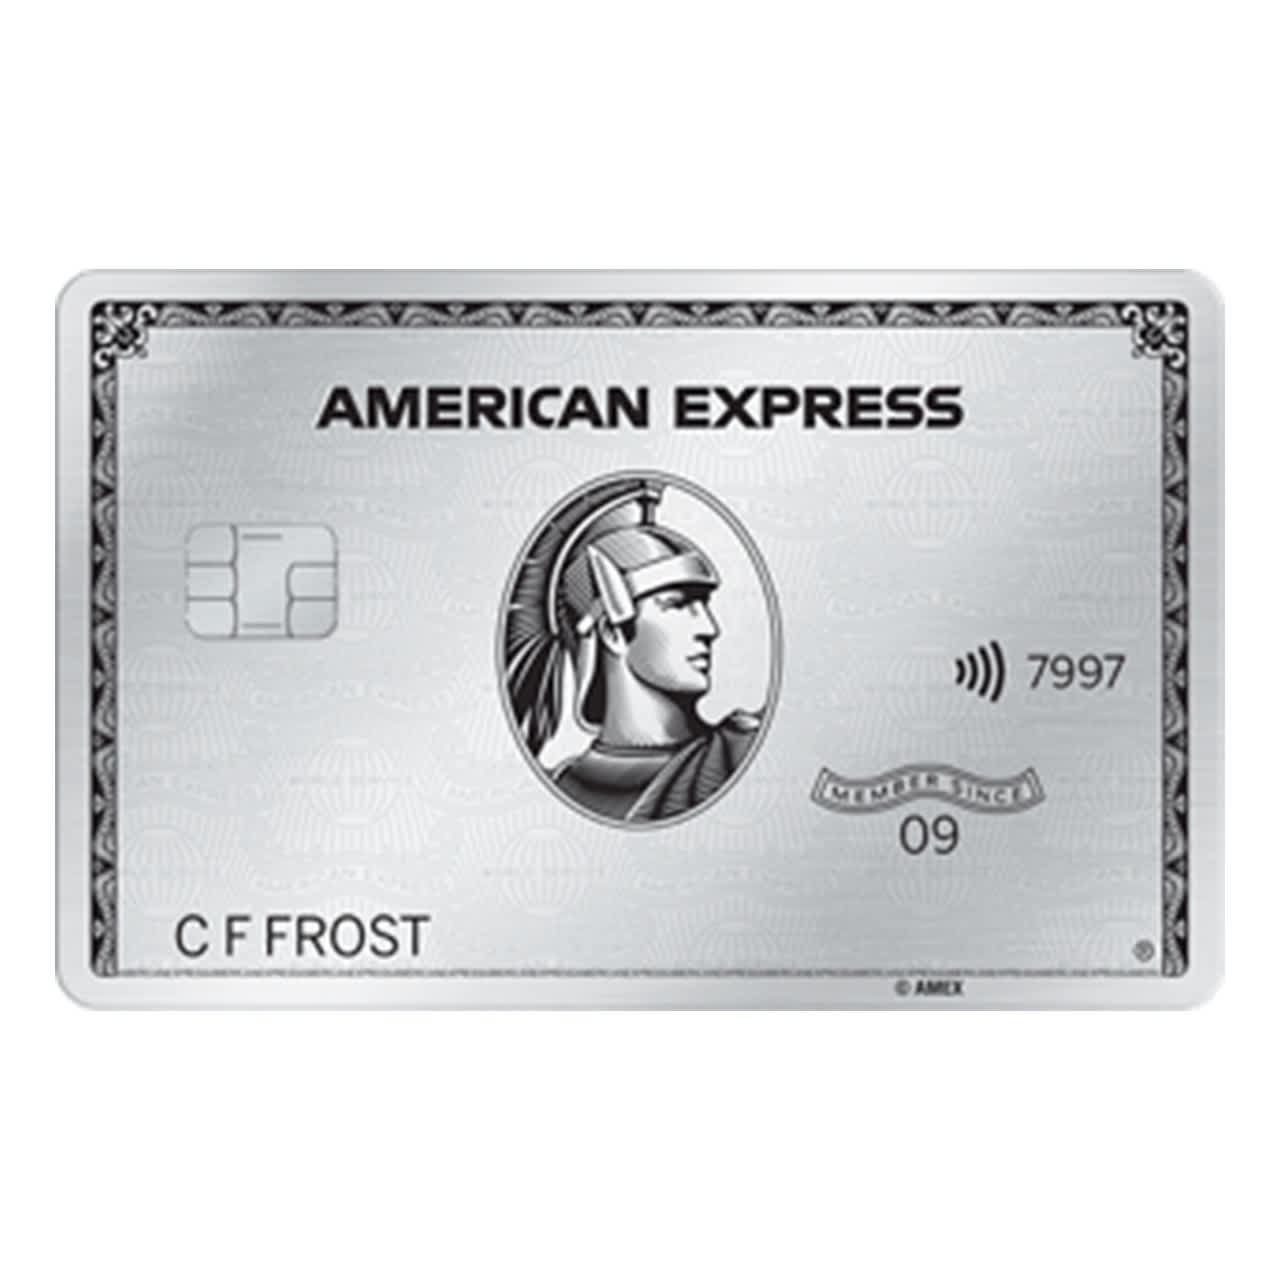 List 90+ Images what does an american express card look like Sharp